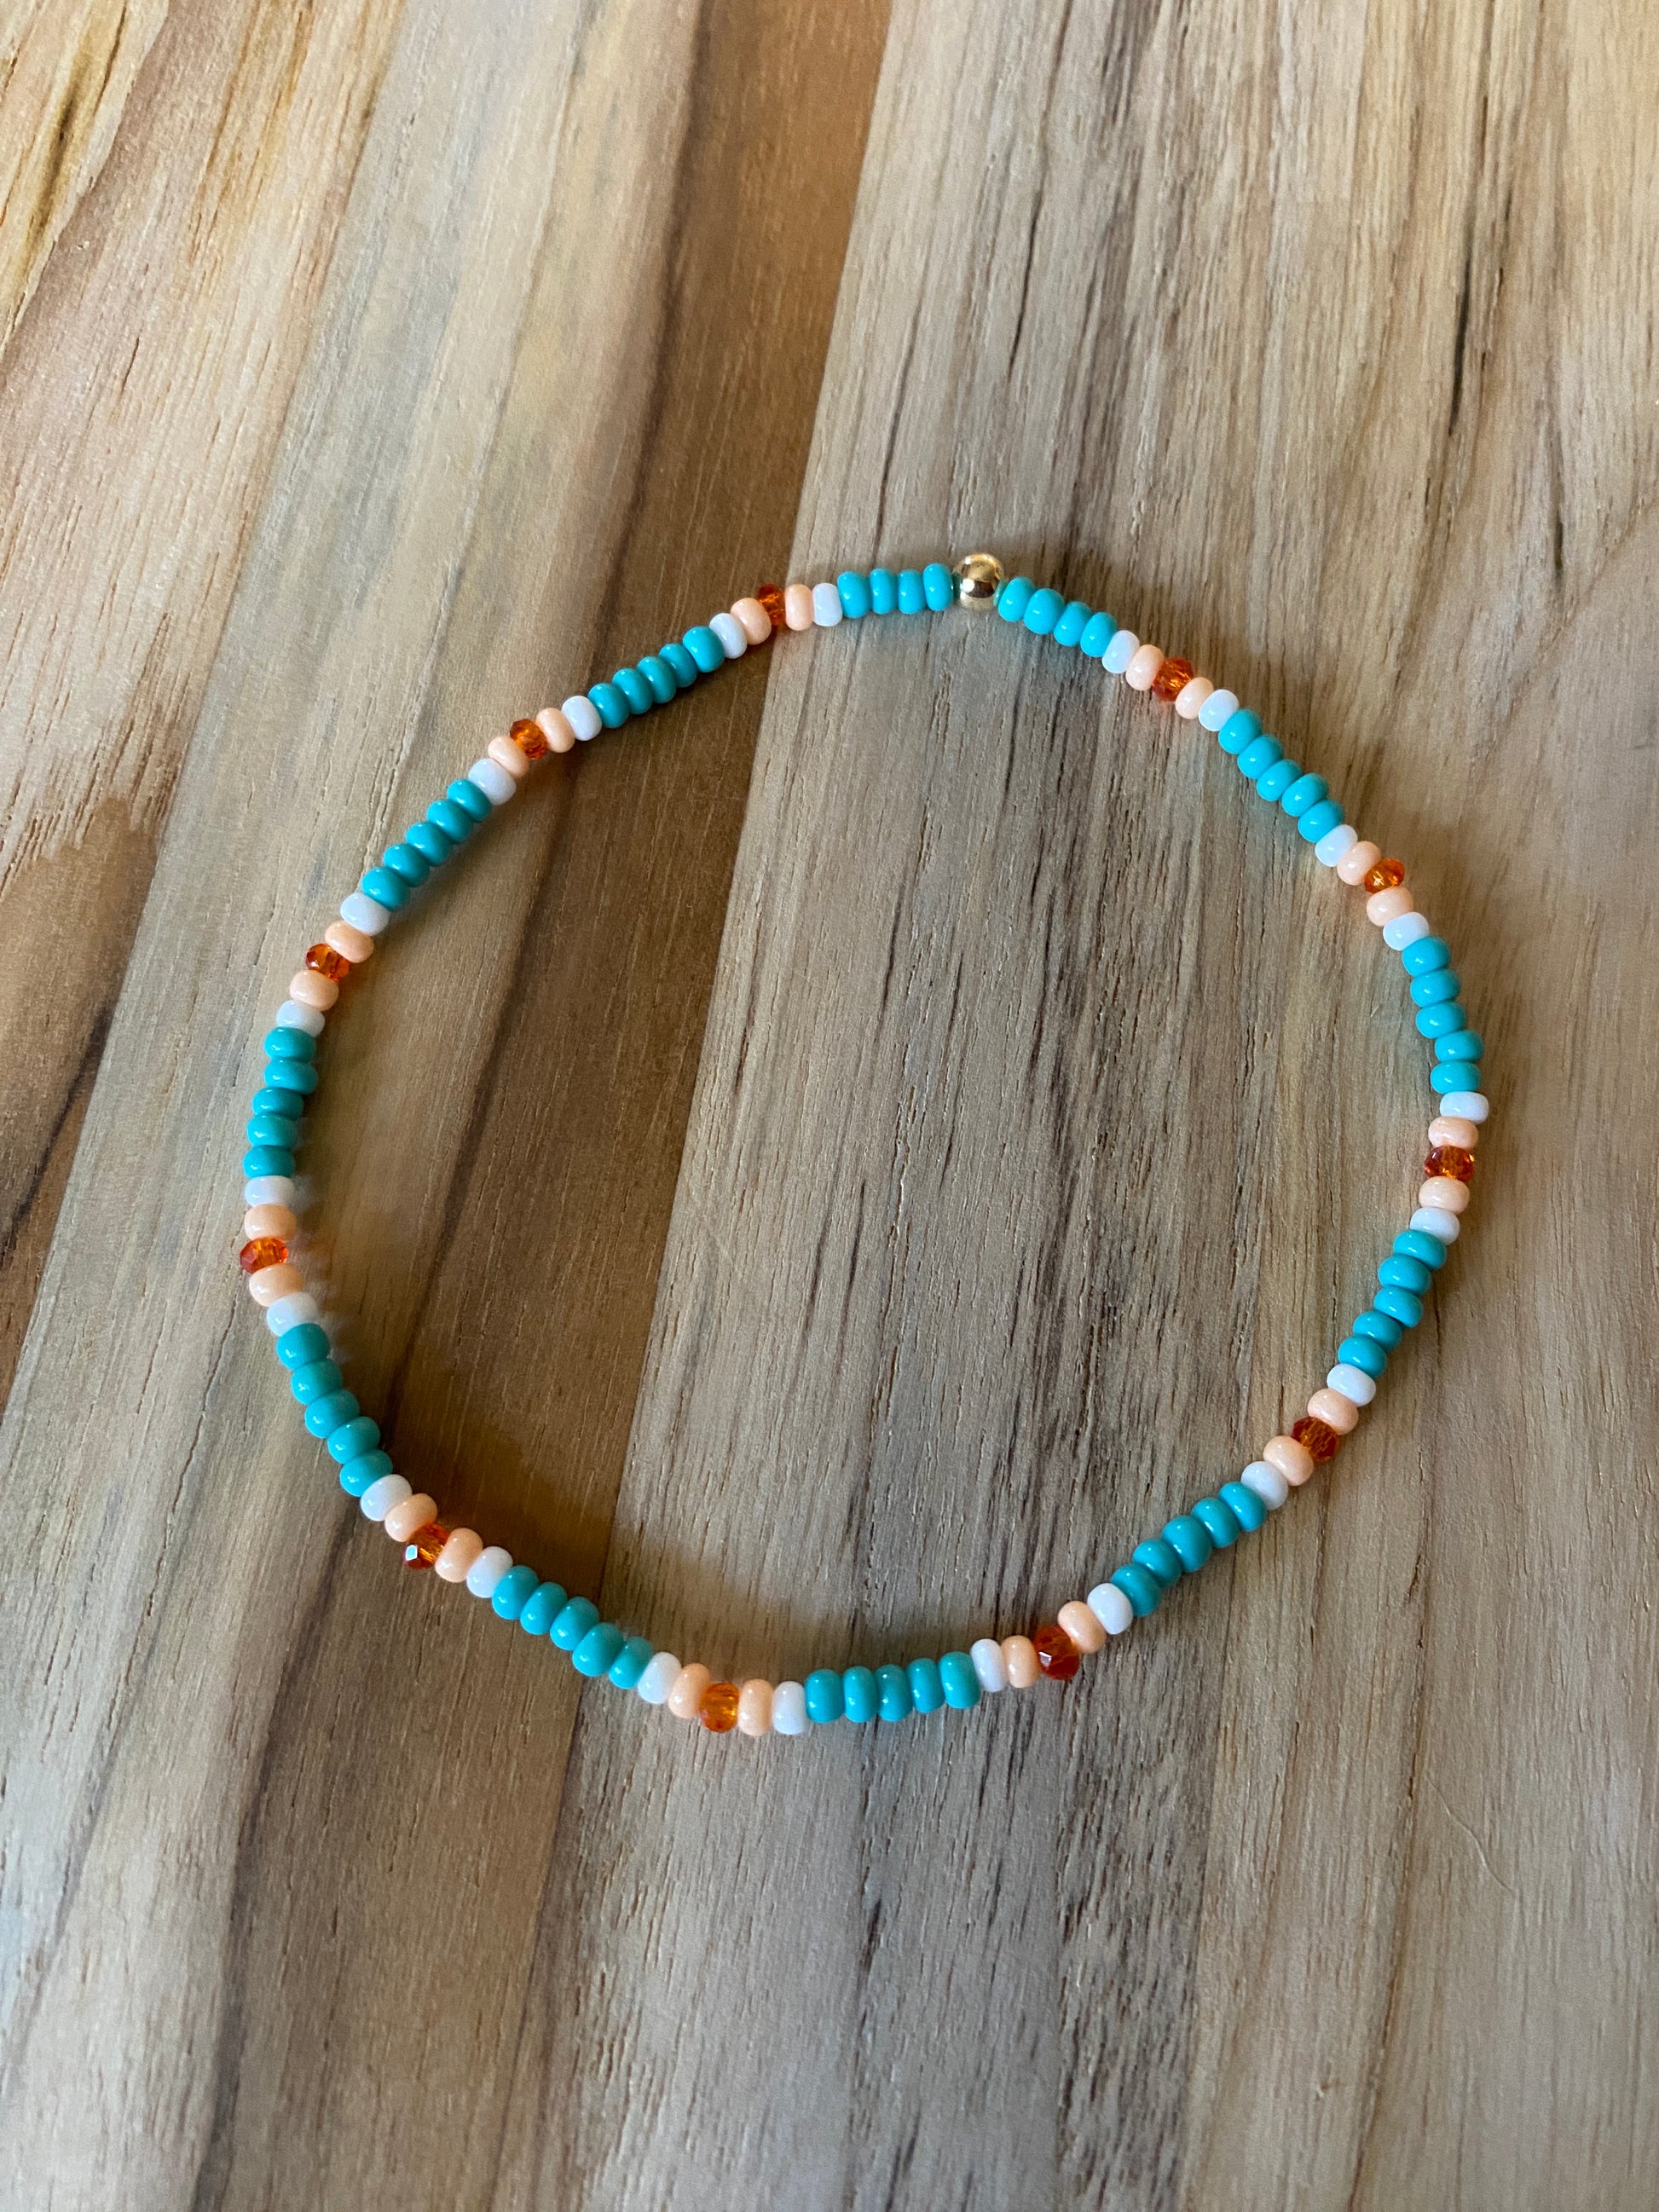 Dainty Beach Vibe Turquoise Seed Bead Ankle Bracelet Anklet with White and Orange Accents - My Urban Gems